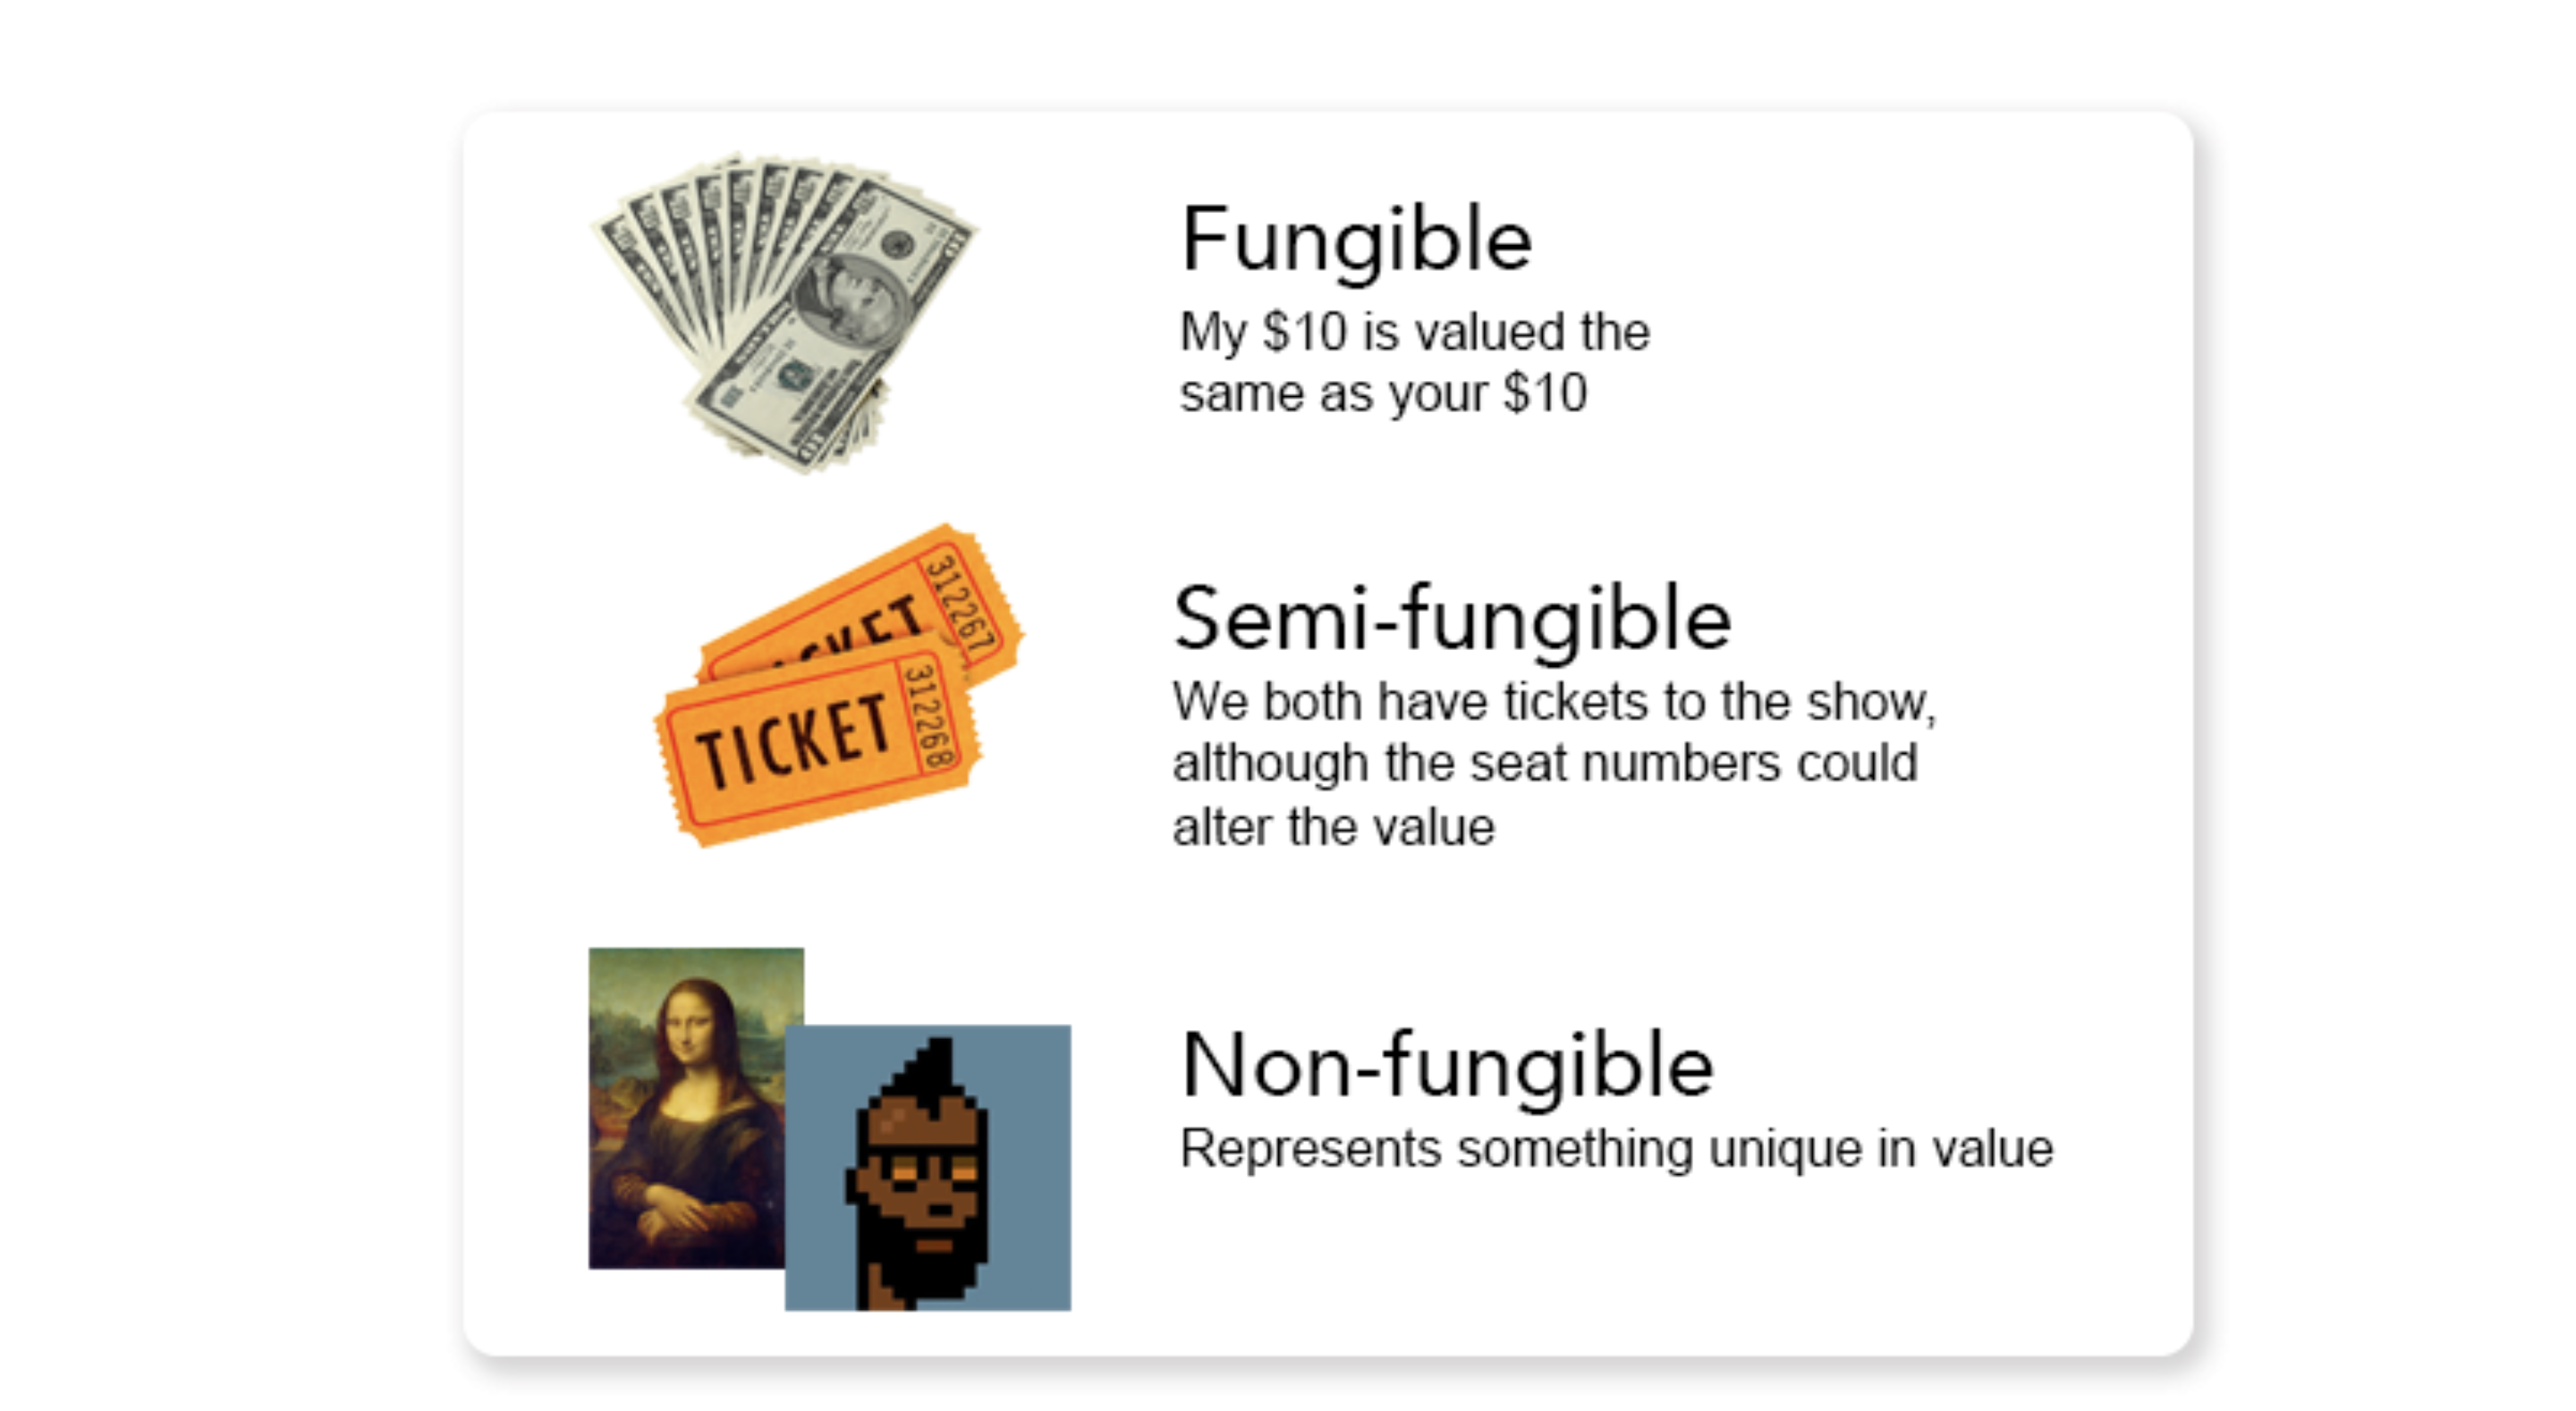 Comparison of fungible, semi-fungible, and non-fungible assets